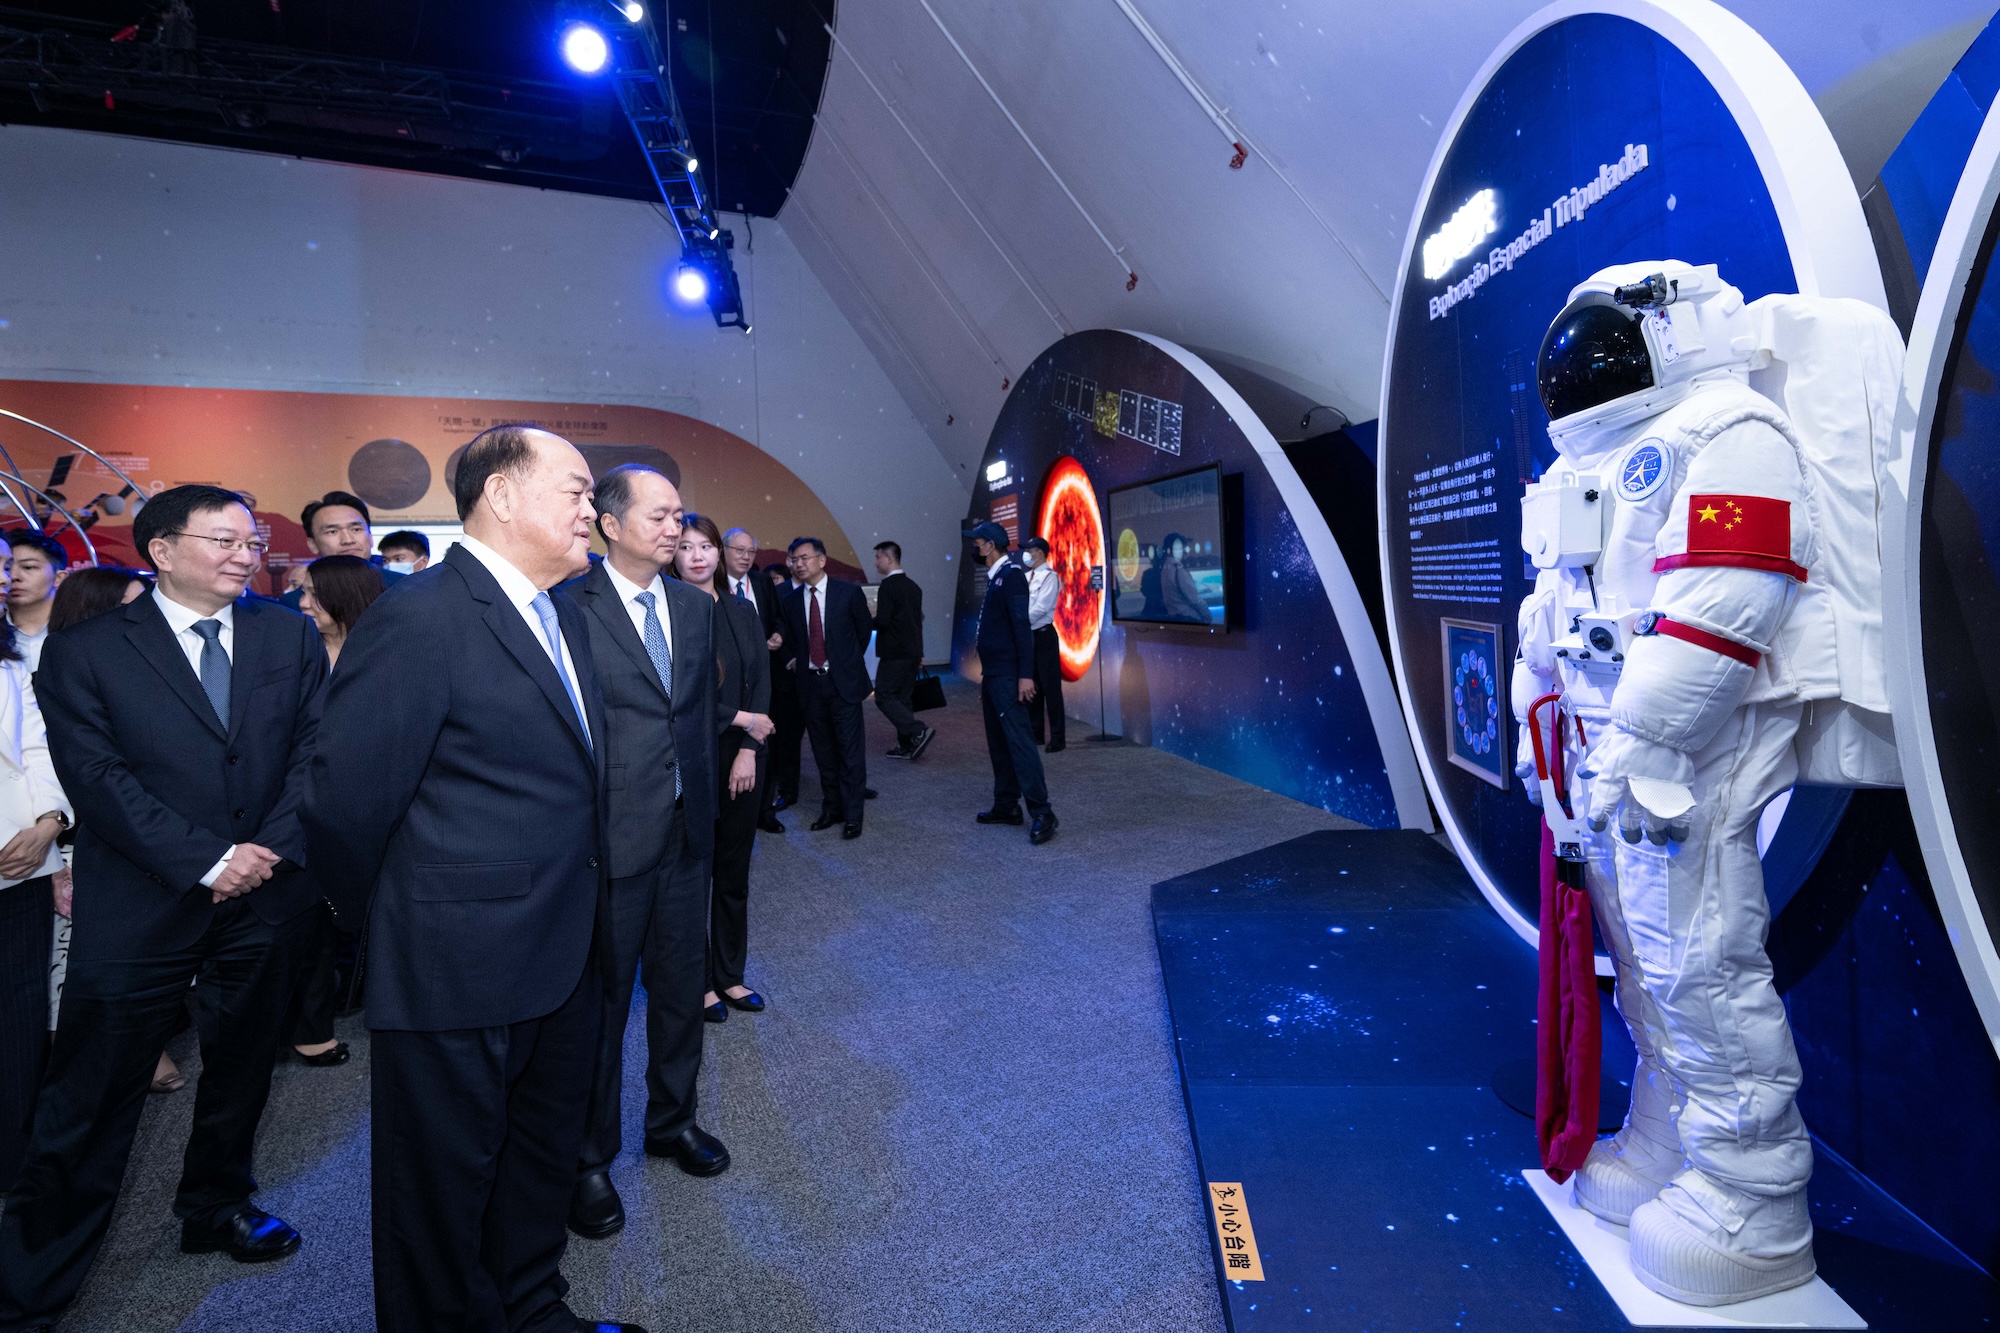 Ho Iat Seng during the visit to an exhibition of China's achievements on space exploration and navigation held in the Macao Science Center